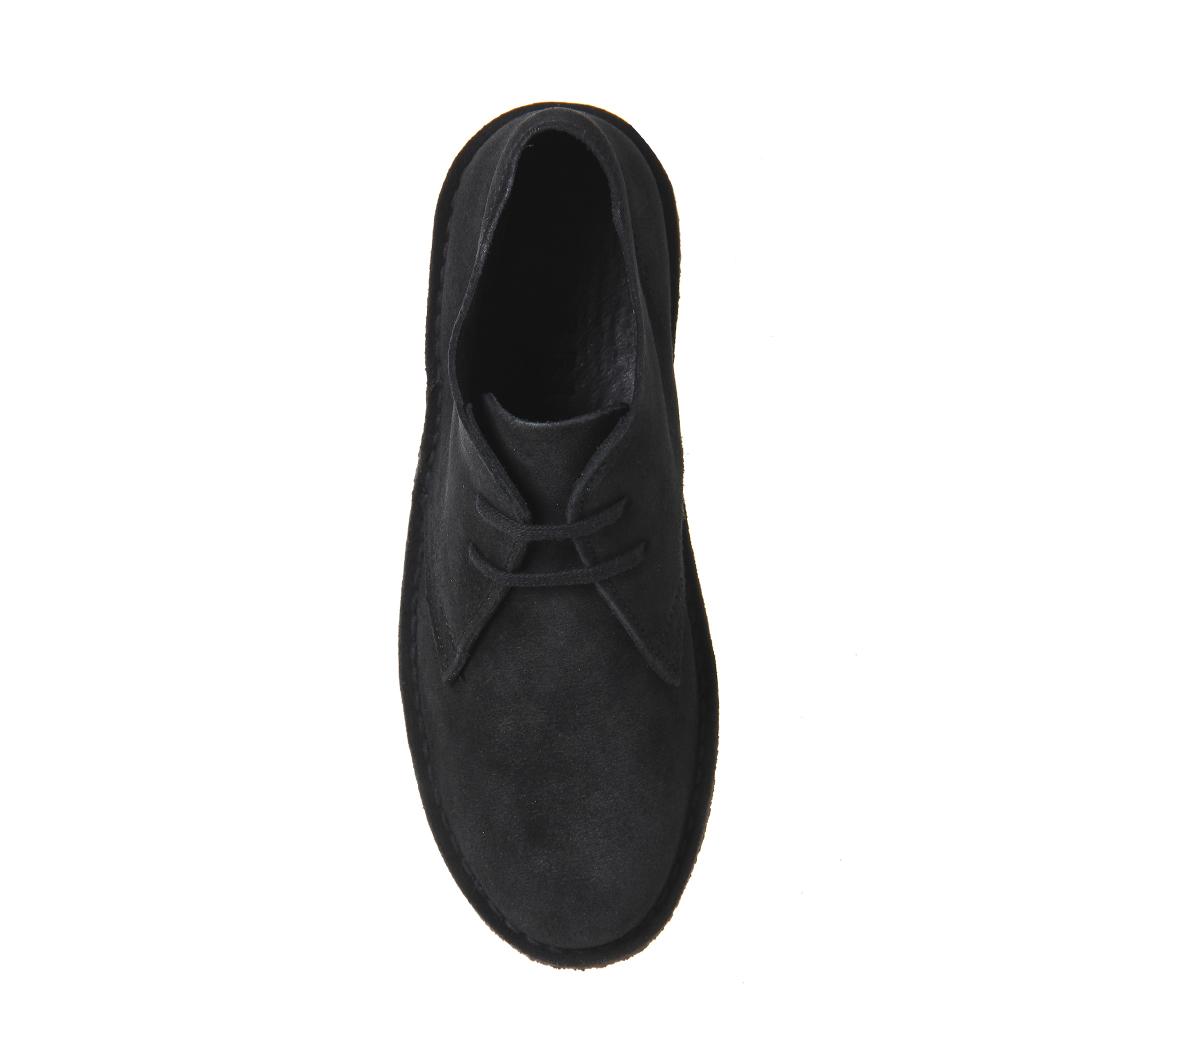 Office Uphill Desert Boots Black Suede Black Sole - Ankle Boots